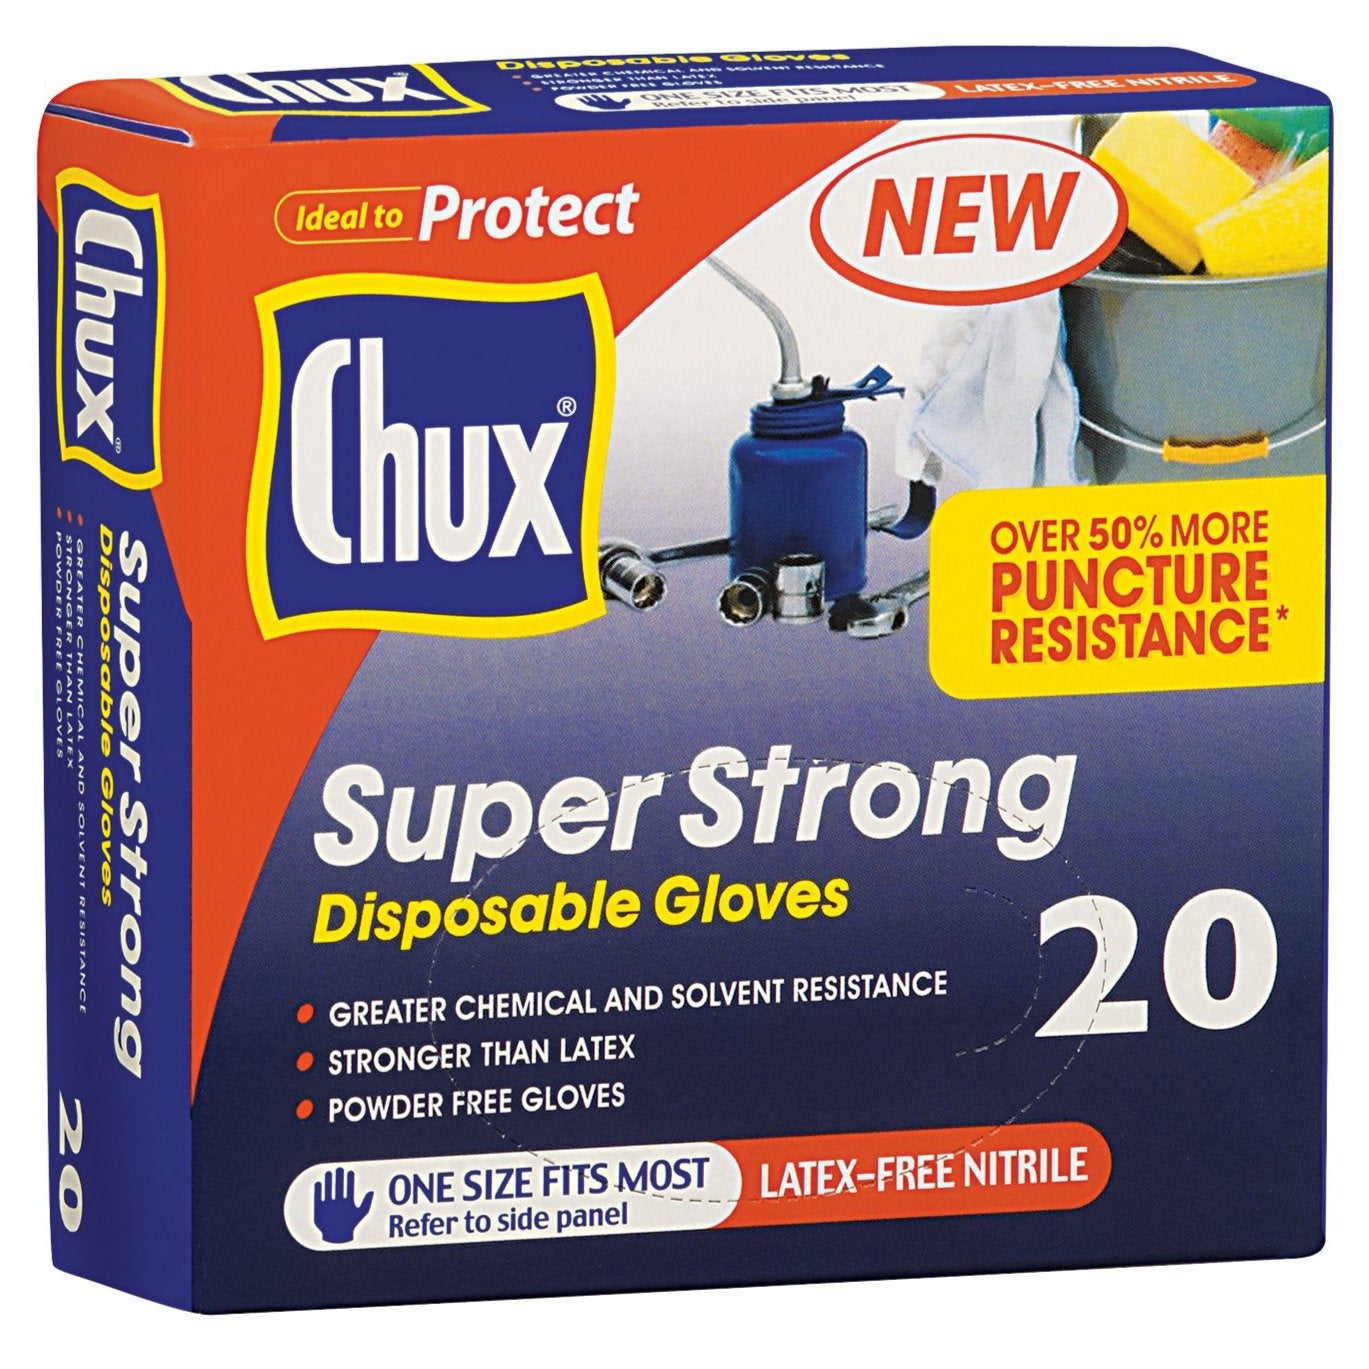 Chux Super Strong Disposable Gloves 20pk